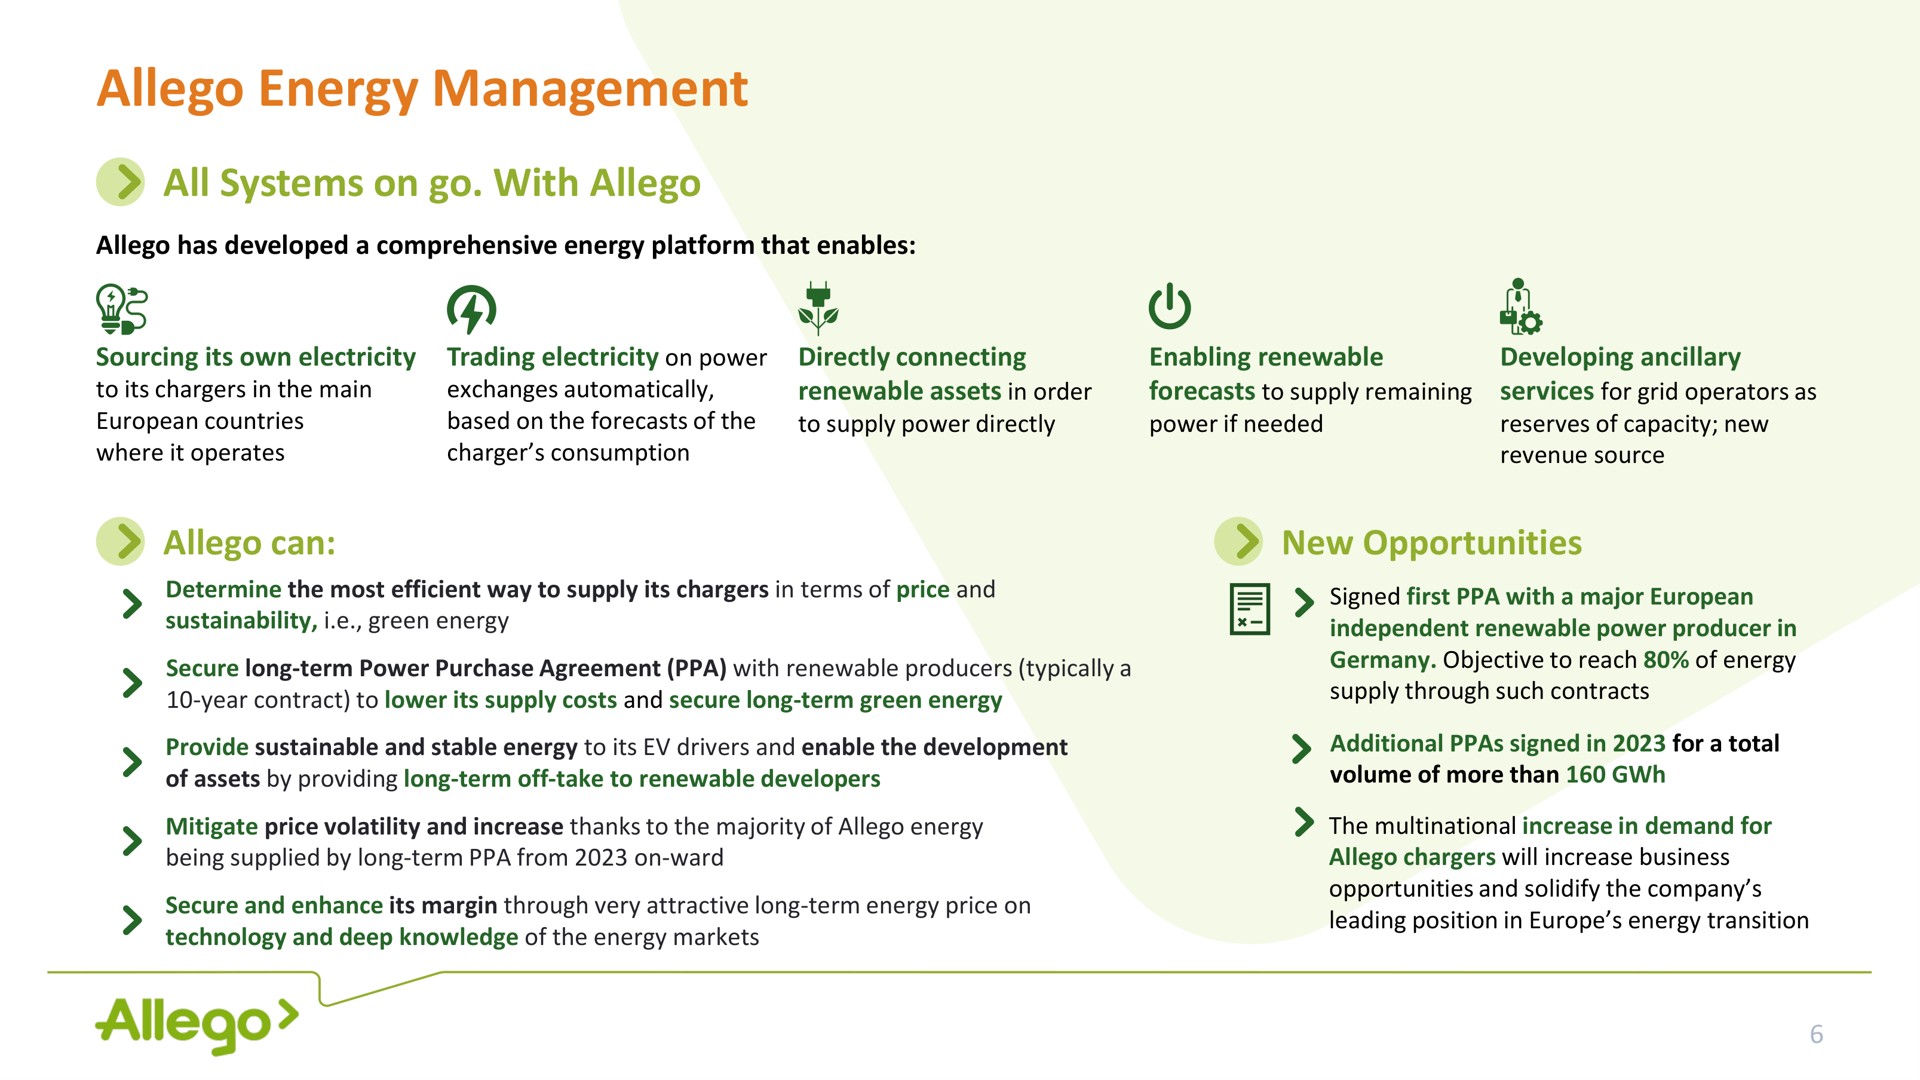 energy management all systems on go with a can new opportunities | Allego